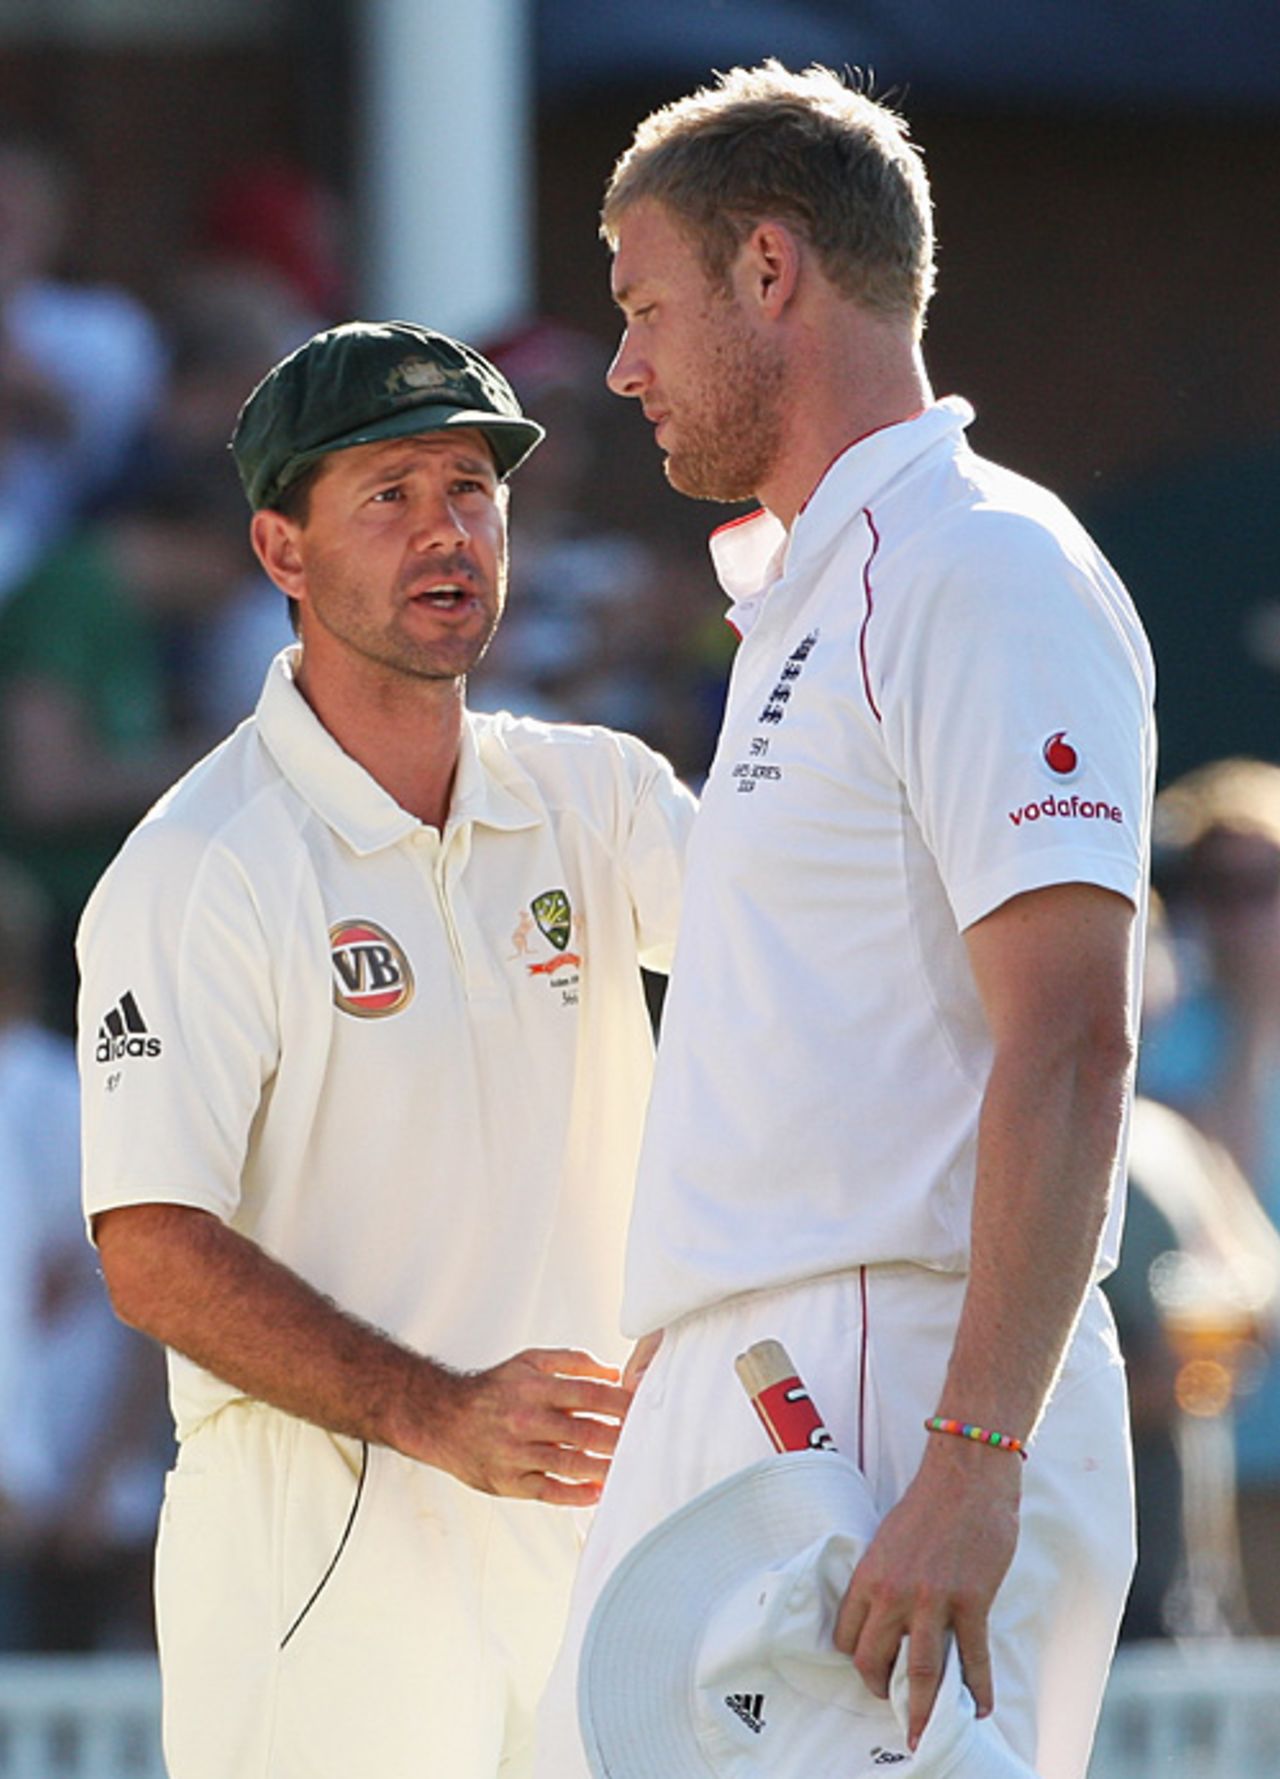 Ricky Ponting shakes hands with Andrew Flintoff in his final Test, England v Australia, 5th Test, The Oval, 4th day, August 23, 2009